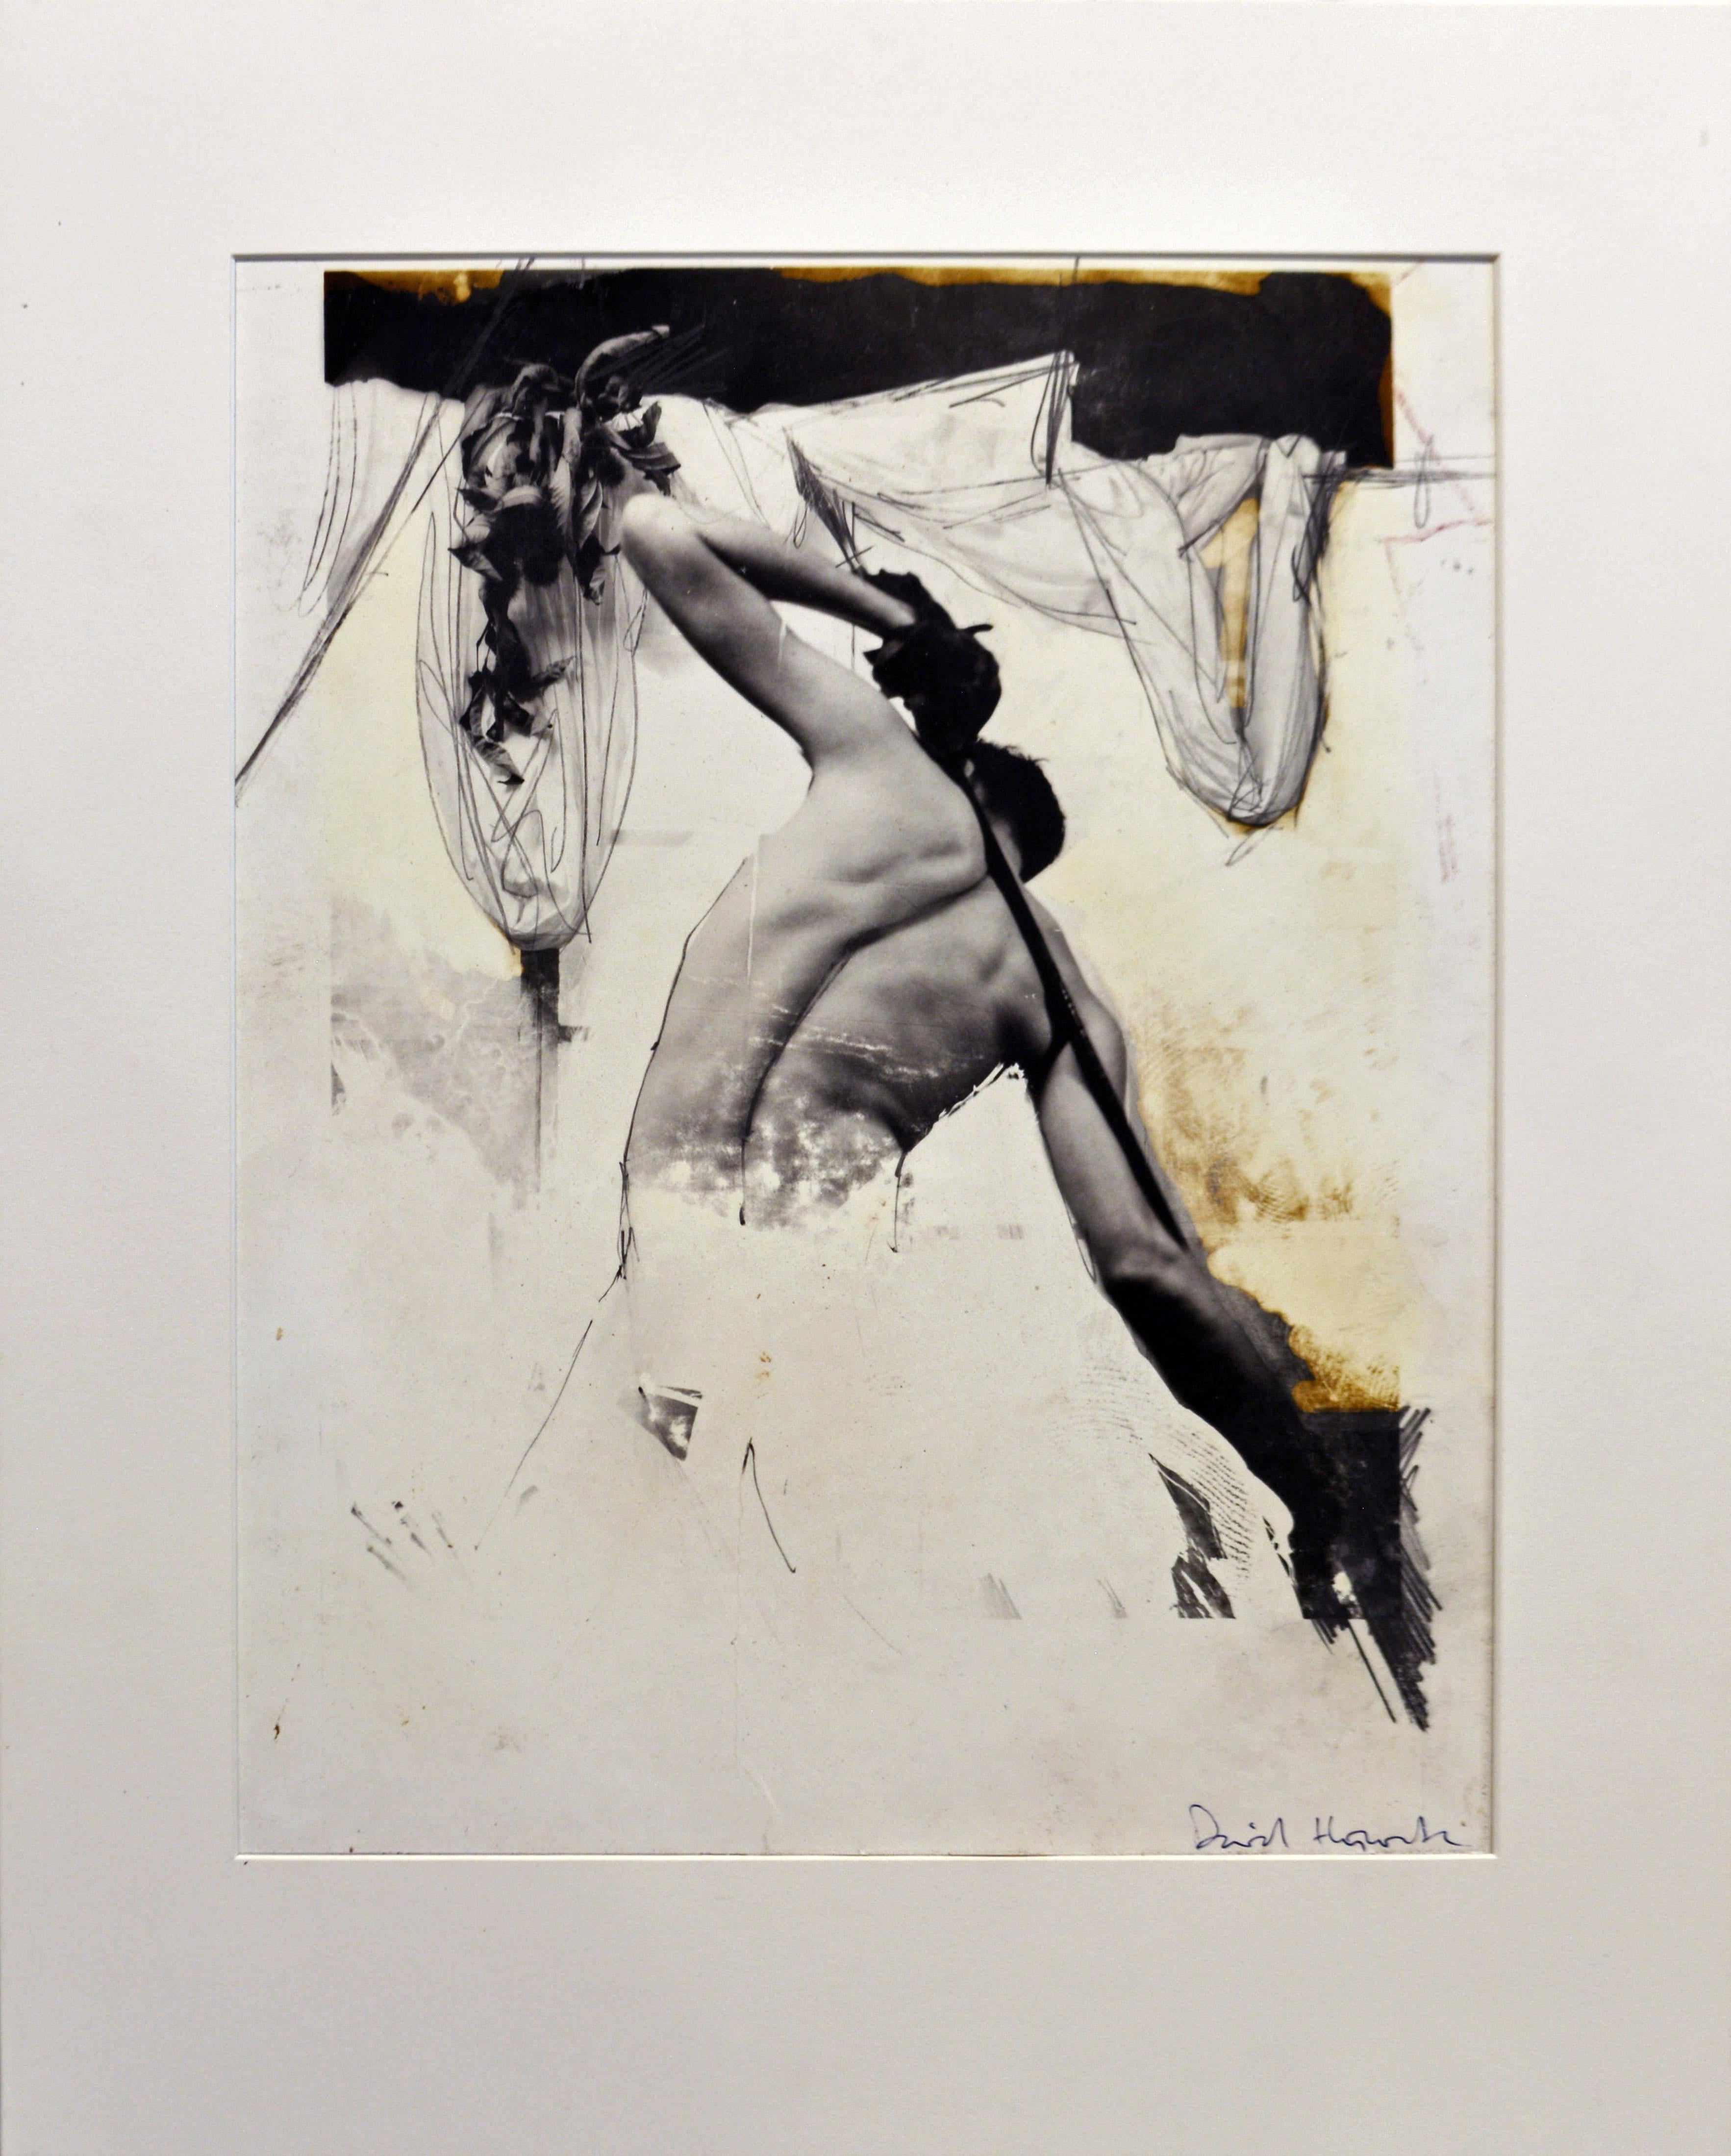 David Hiscock (British b. 1956)
'Photographic Male Nude Composition' 
Photographic and mixed media print with applied handwork.
Mounted on gray cardboard and matted. Signed recto and inscribed verso on cardboard.
Image: 11.6 x 14.75 in / 29 x 37